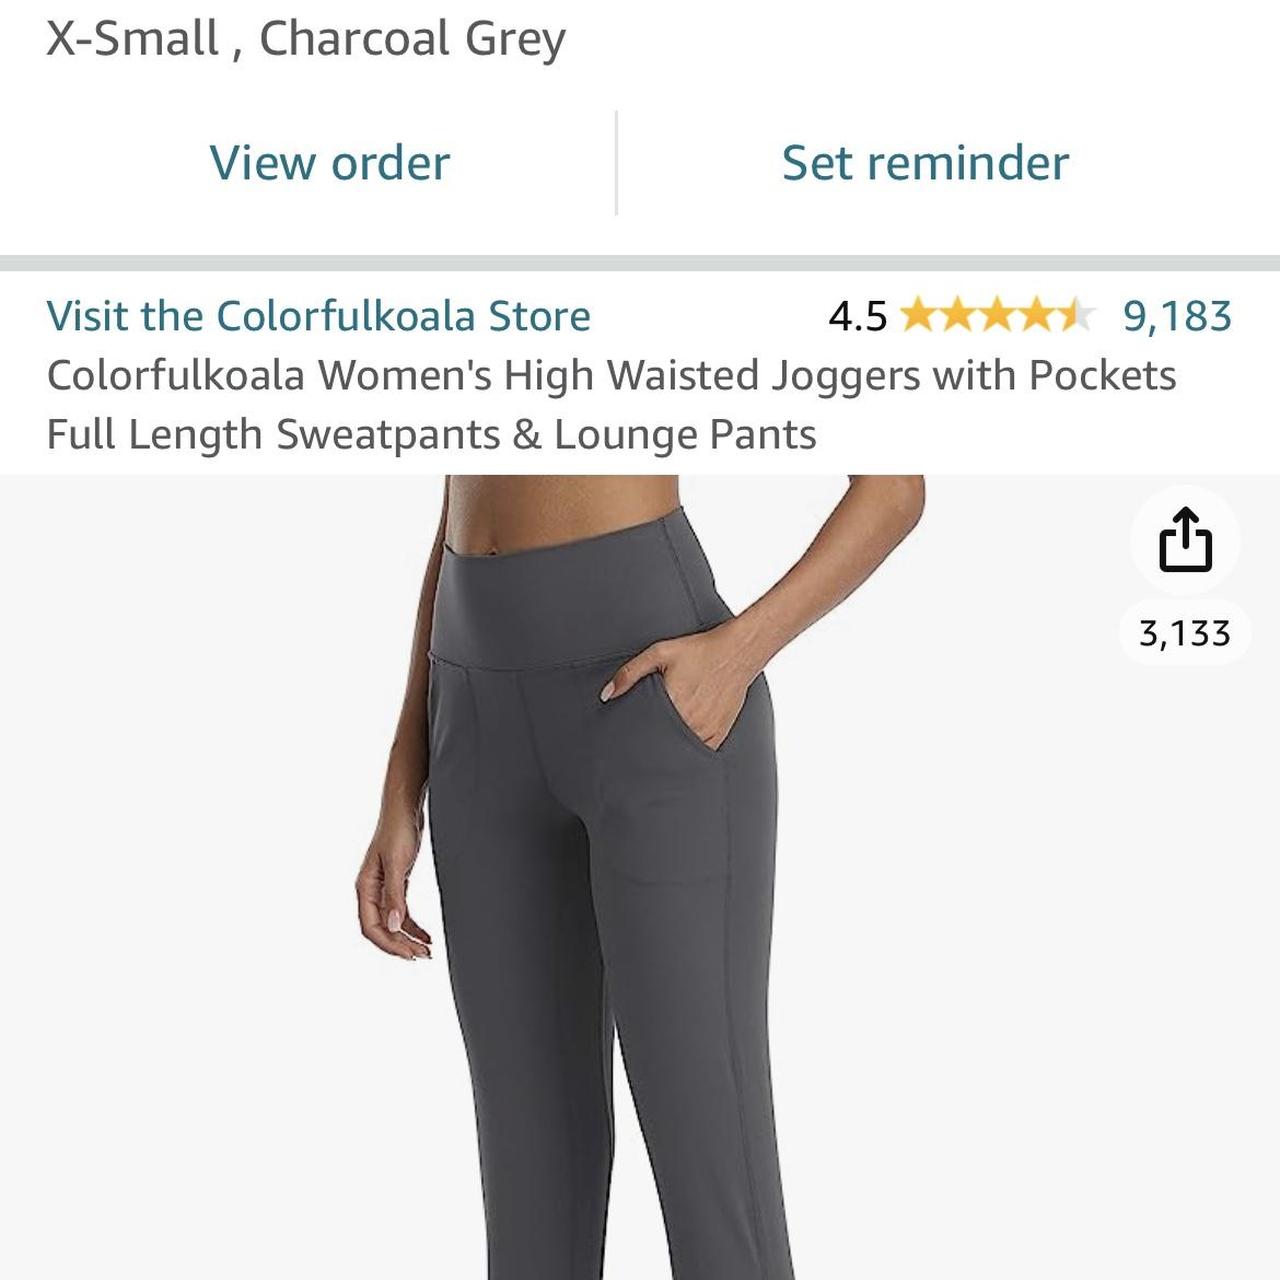 Colorfulkoala joggers - $18 (40% Off Retail) - From breanna